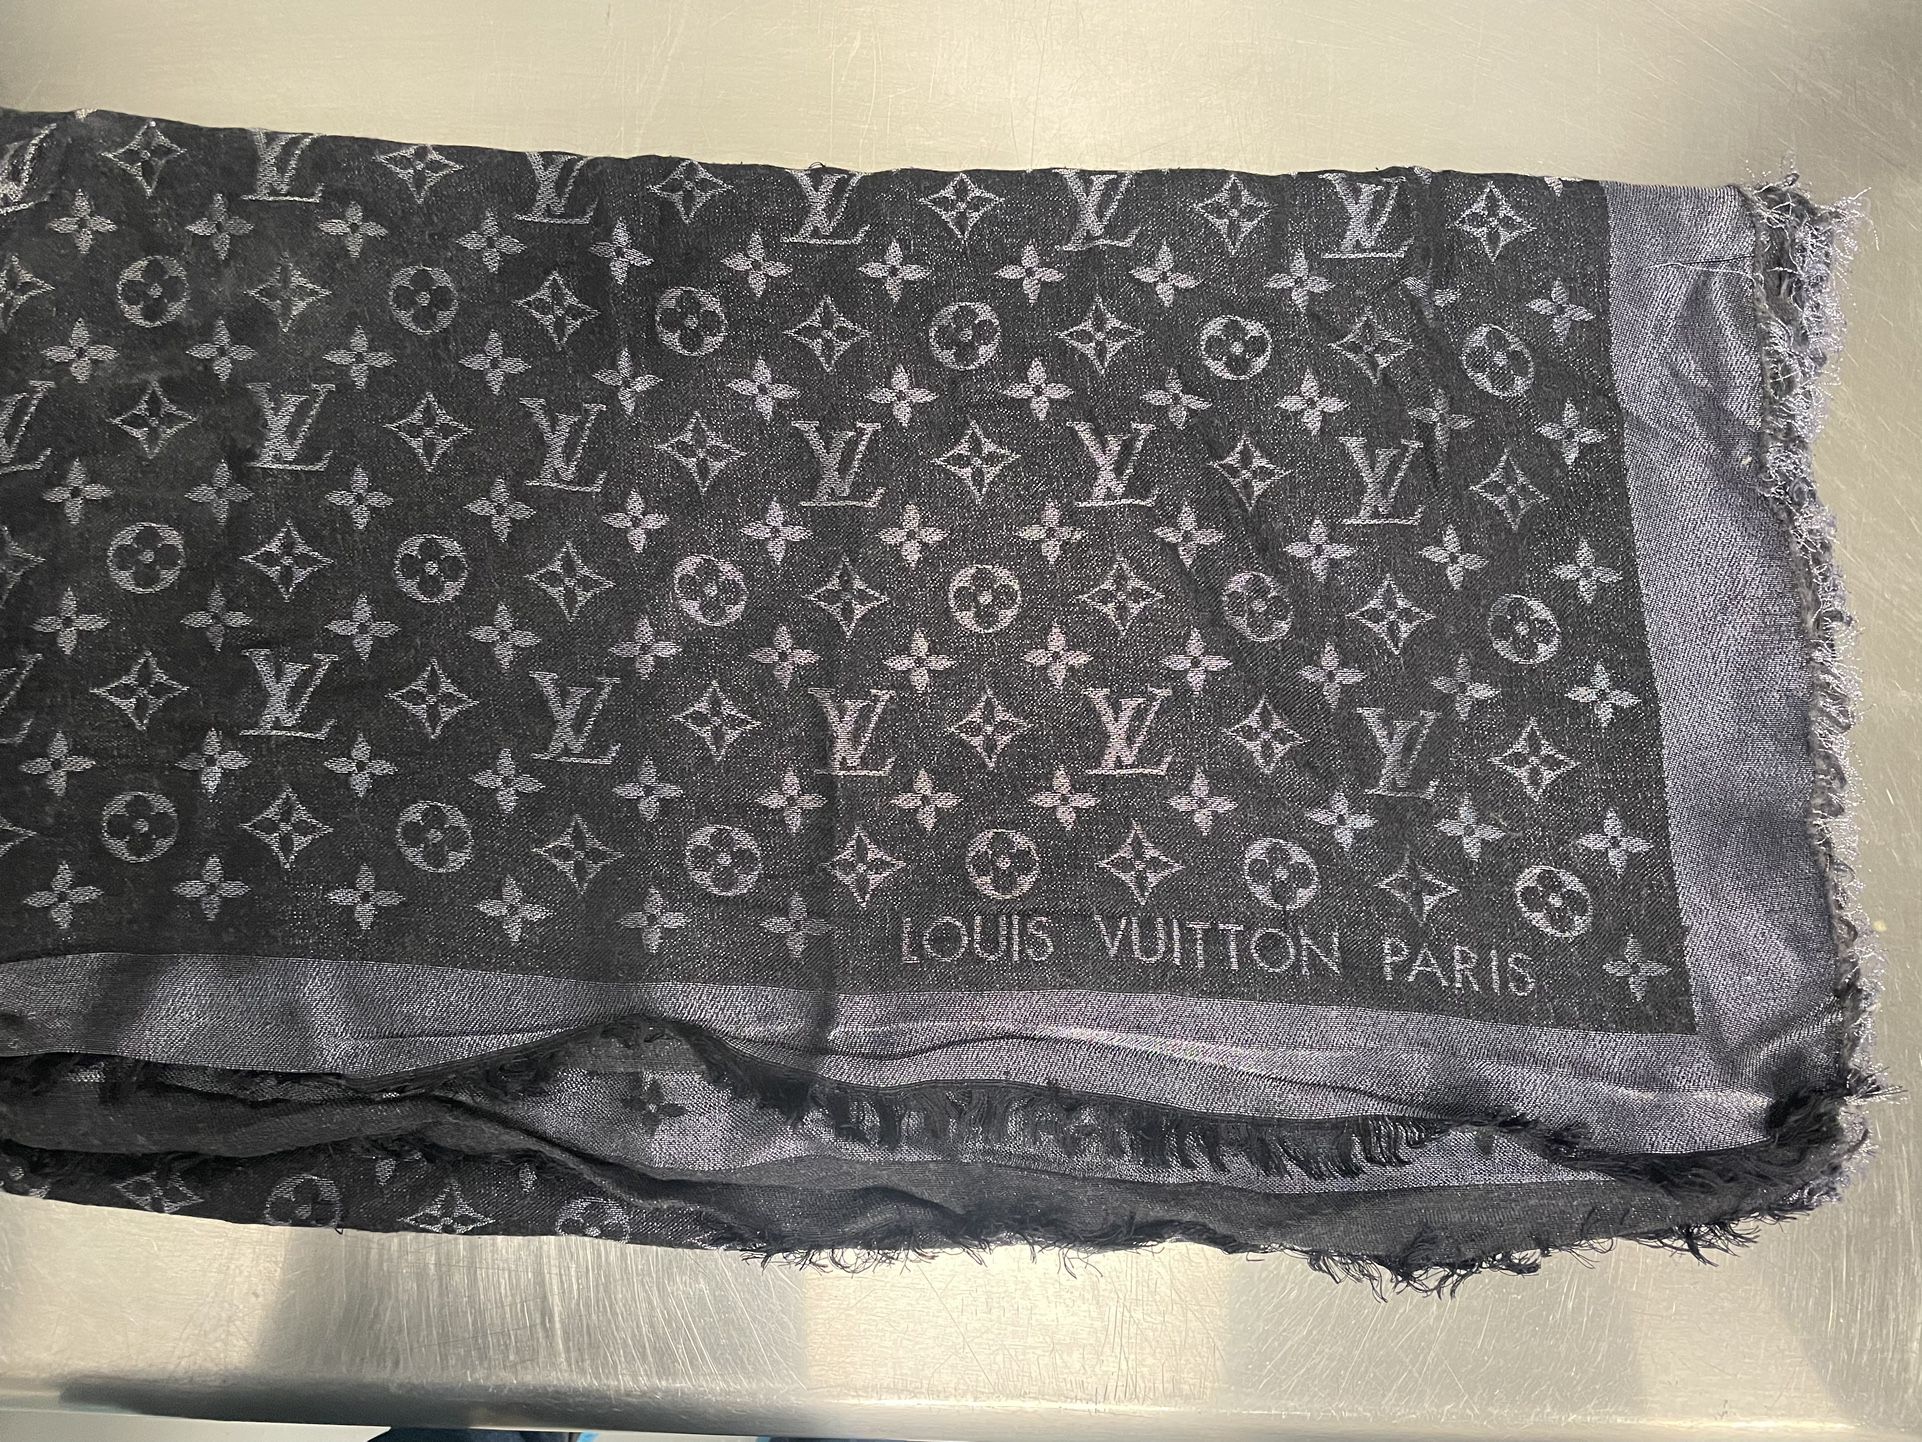 Louis Vuitton LV Black Silver Shine Scarf Shawl for Sale in Ontario, CA -  OfferUp